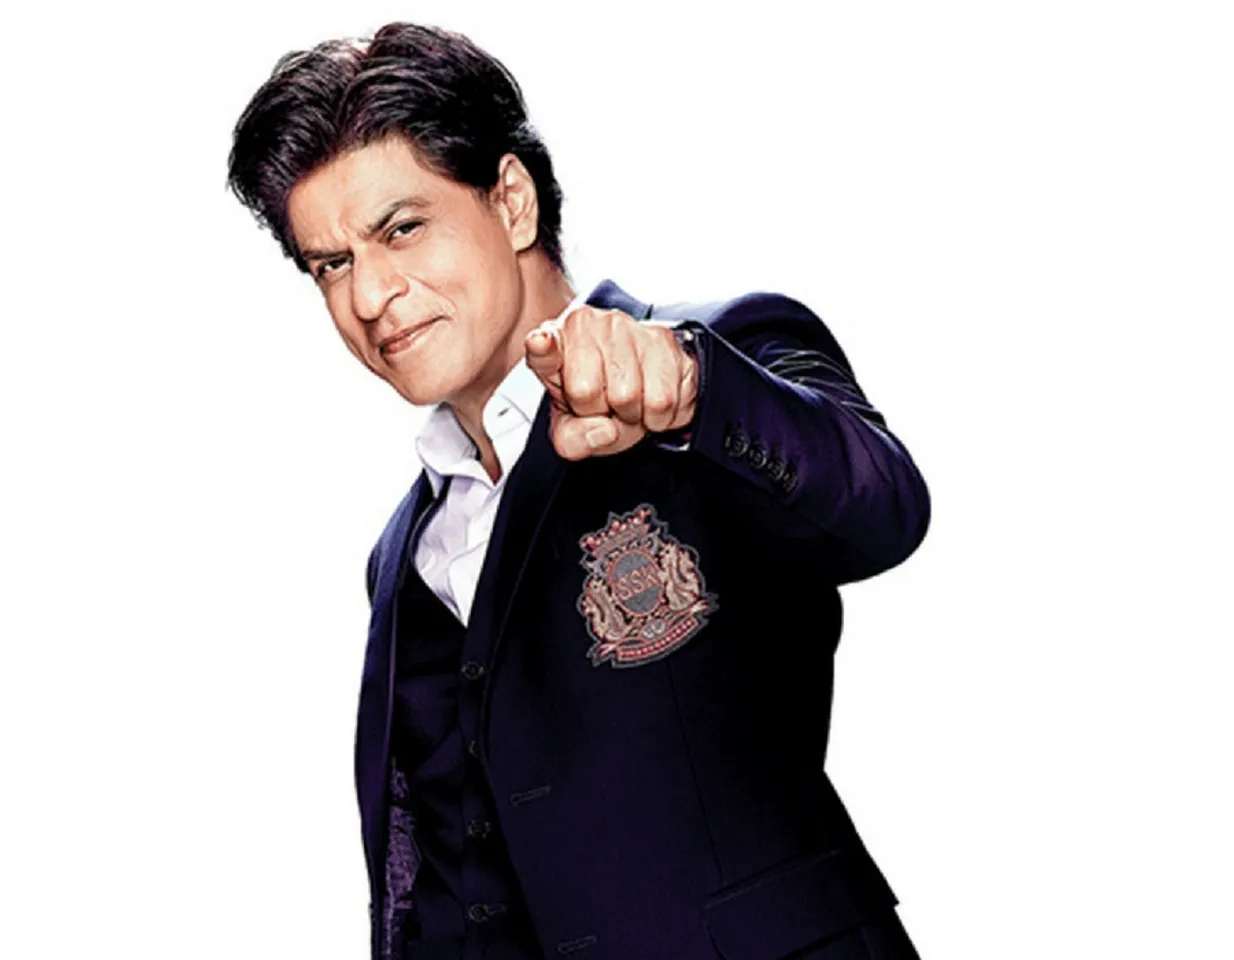 THE KING OF BOLLYWOOD IS ALSO THE KING OF WITS, HERE’S THE PROOF!